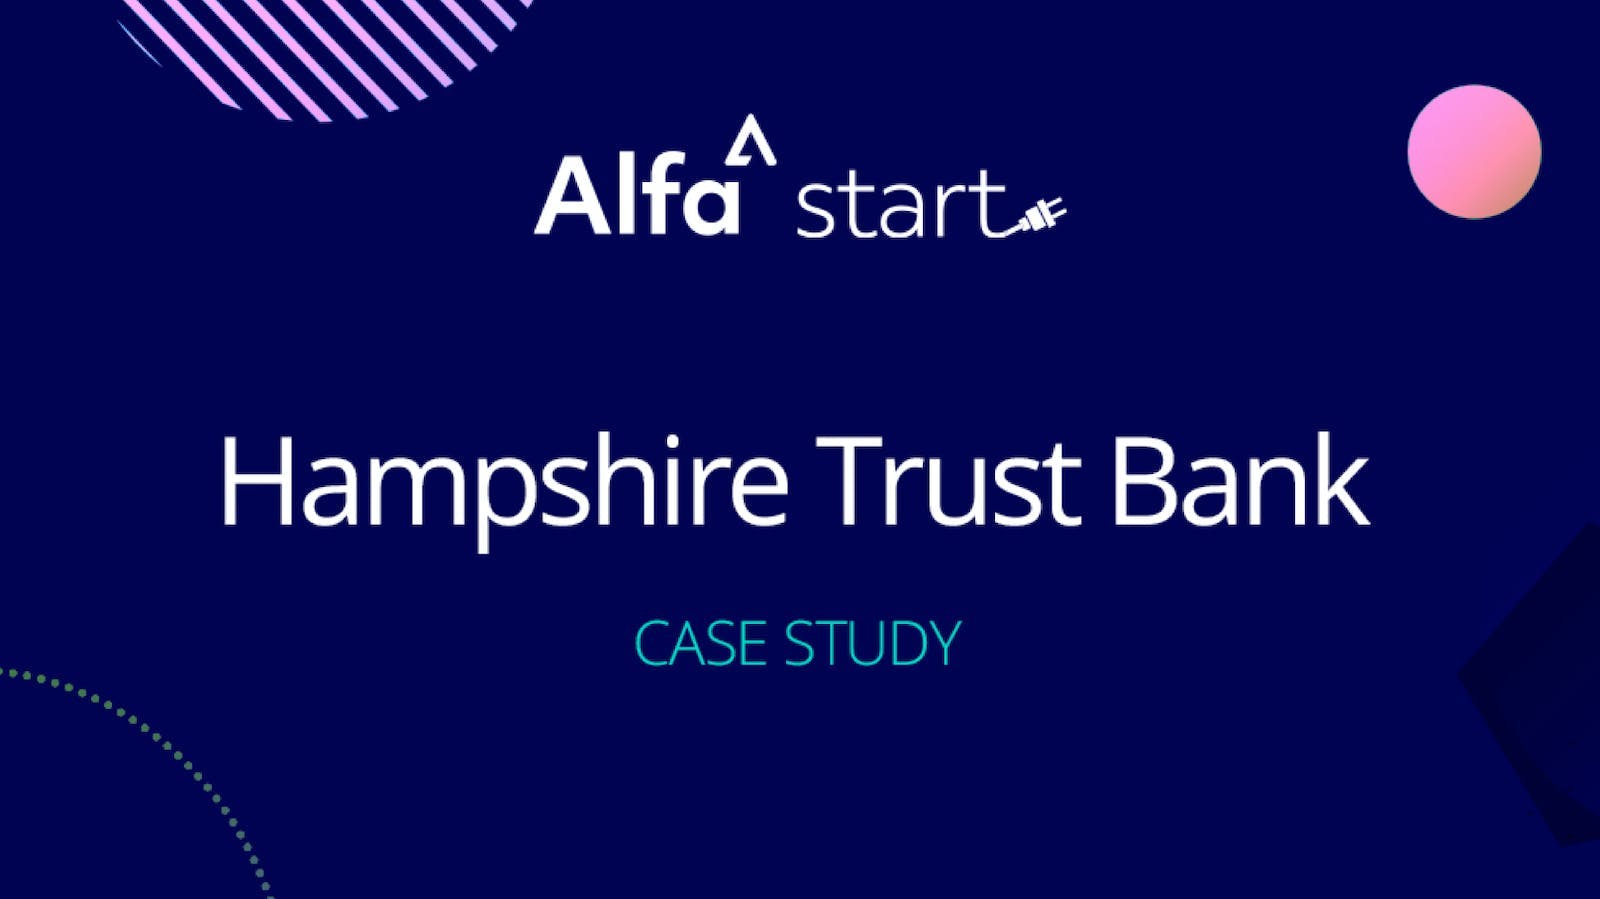 Alfa Start and Hampshire Trust Bank case study cover